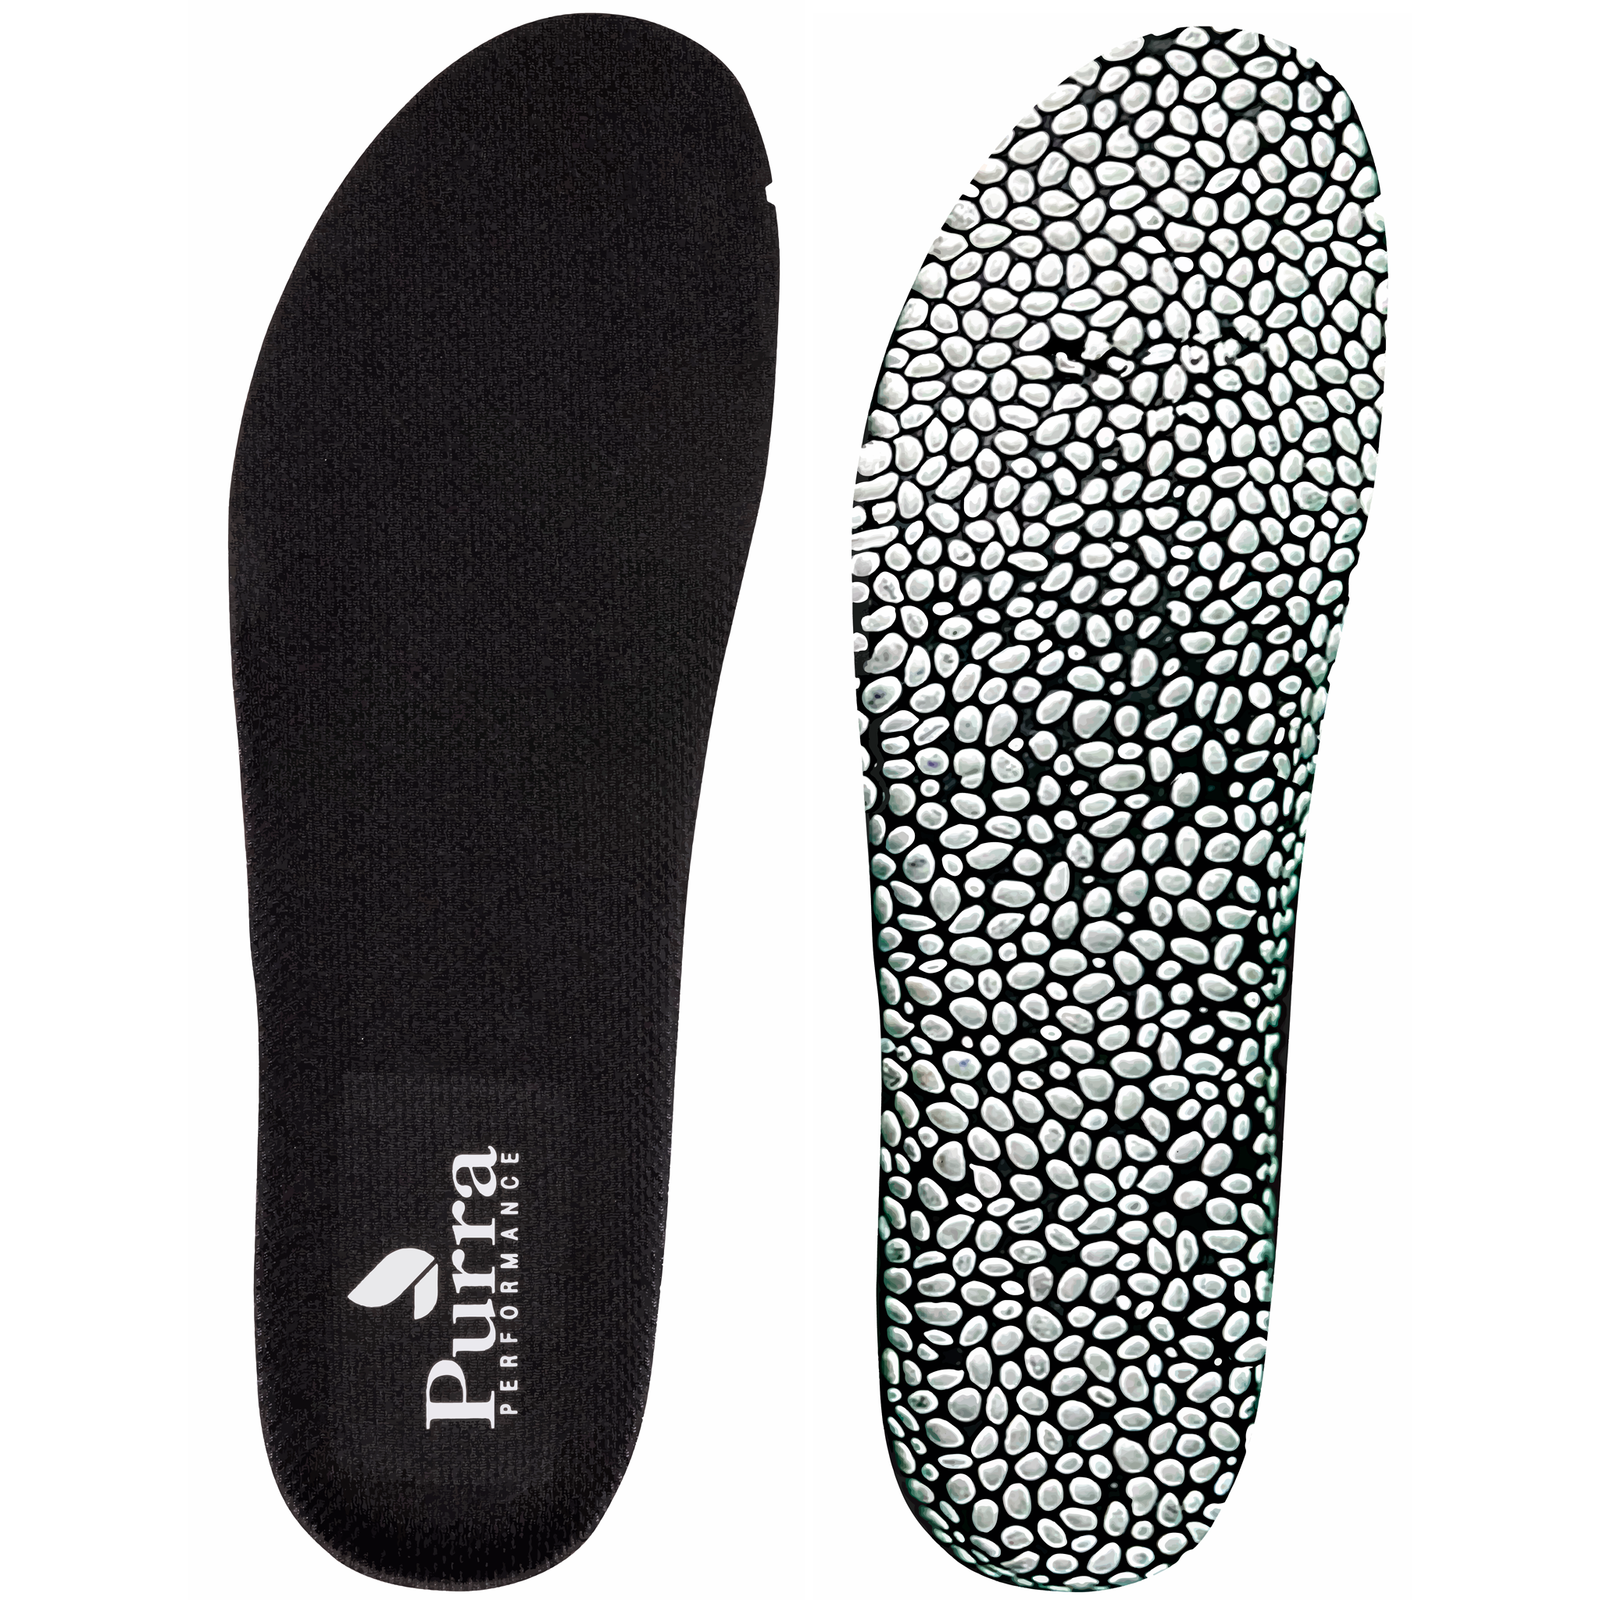 This shows the eco friendly ETPU insole both the black upper and the lower white pebble like image sole. 